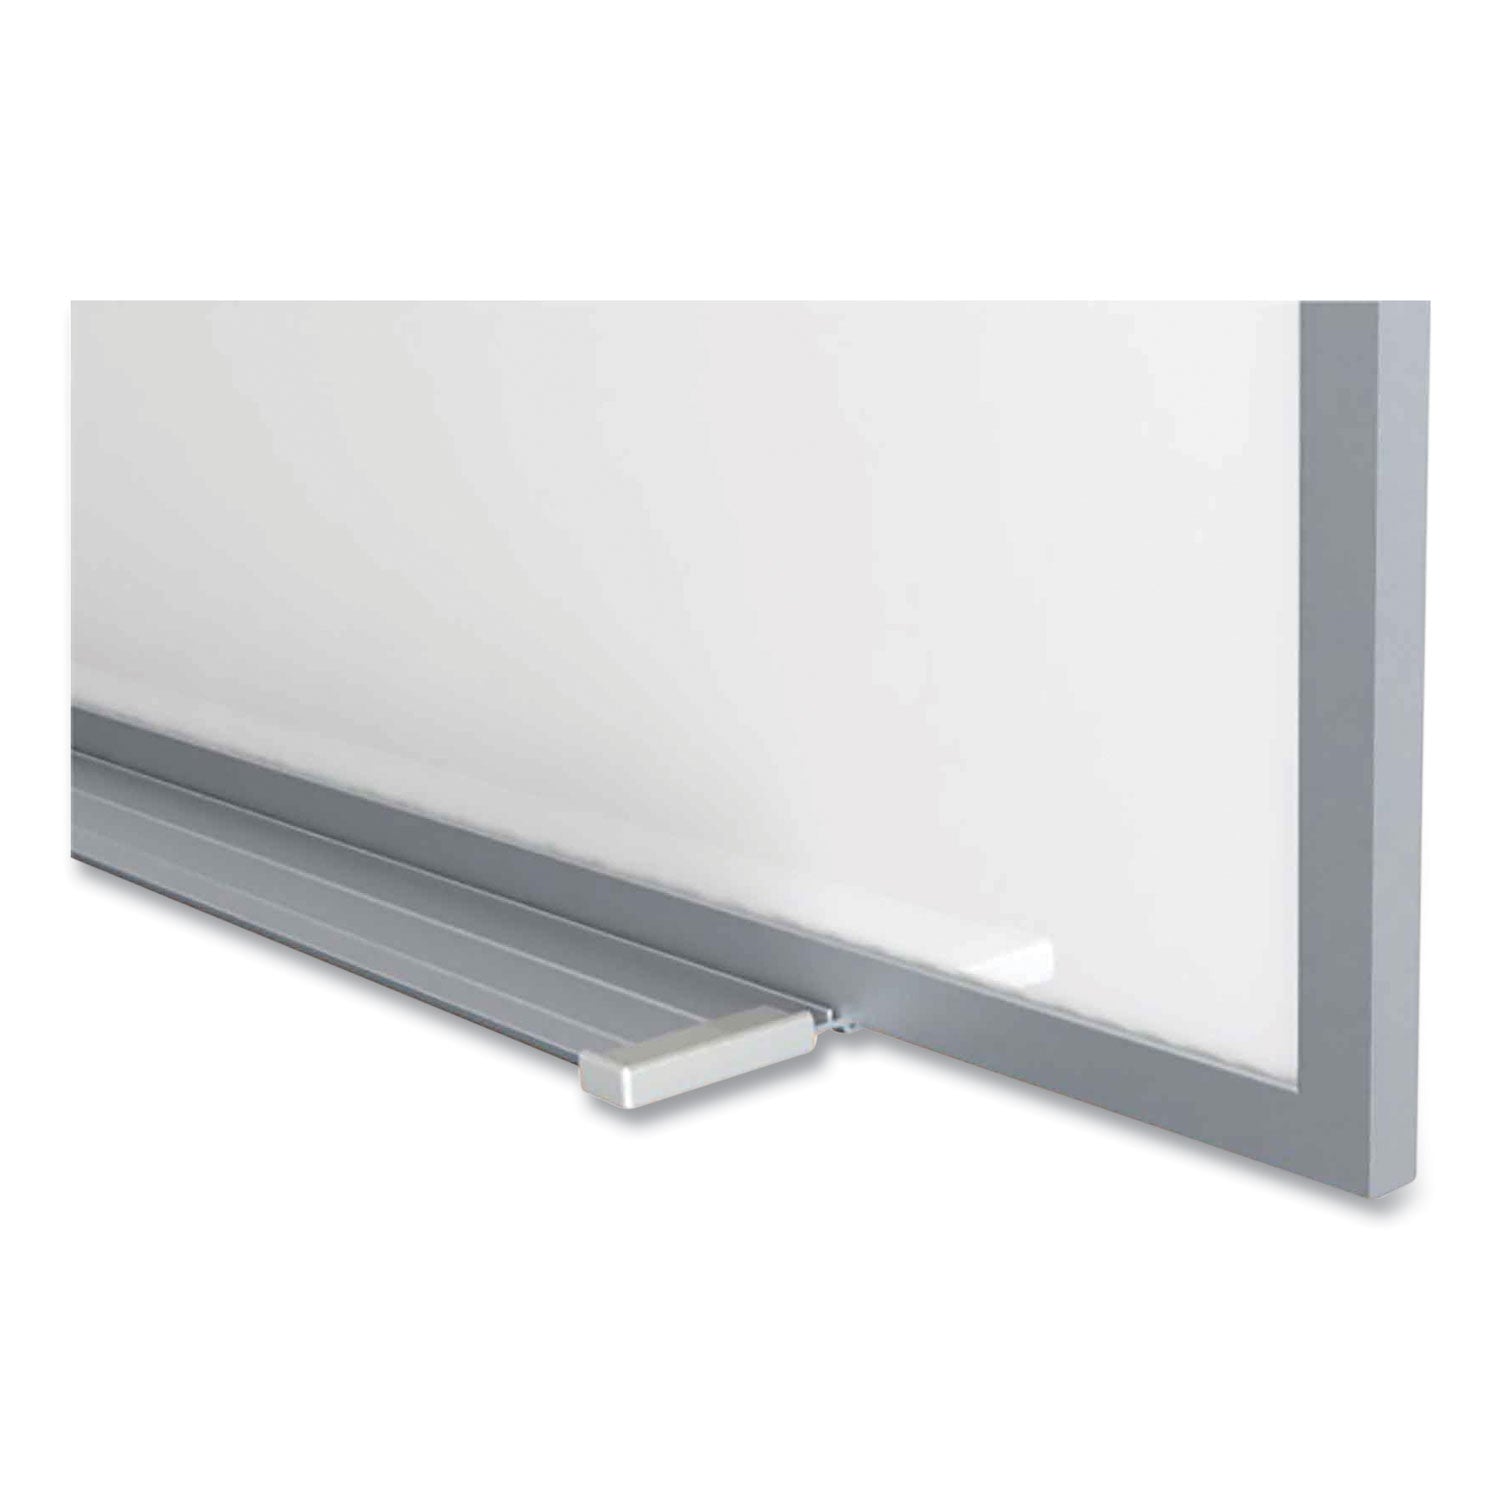 magnetic-porcelain-whiteboard-with-satin-aluminum-frame-and-map-rail-12059-x-6047-white-surface-ships-in-7-10-bus-days_ghem1p5101m - 2